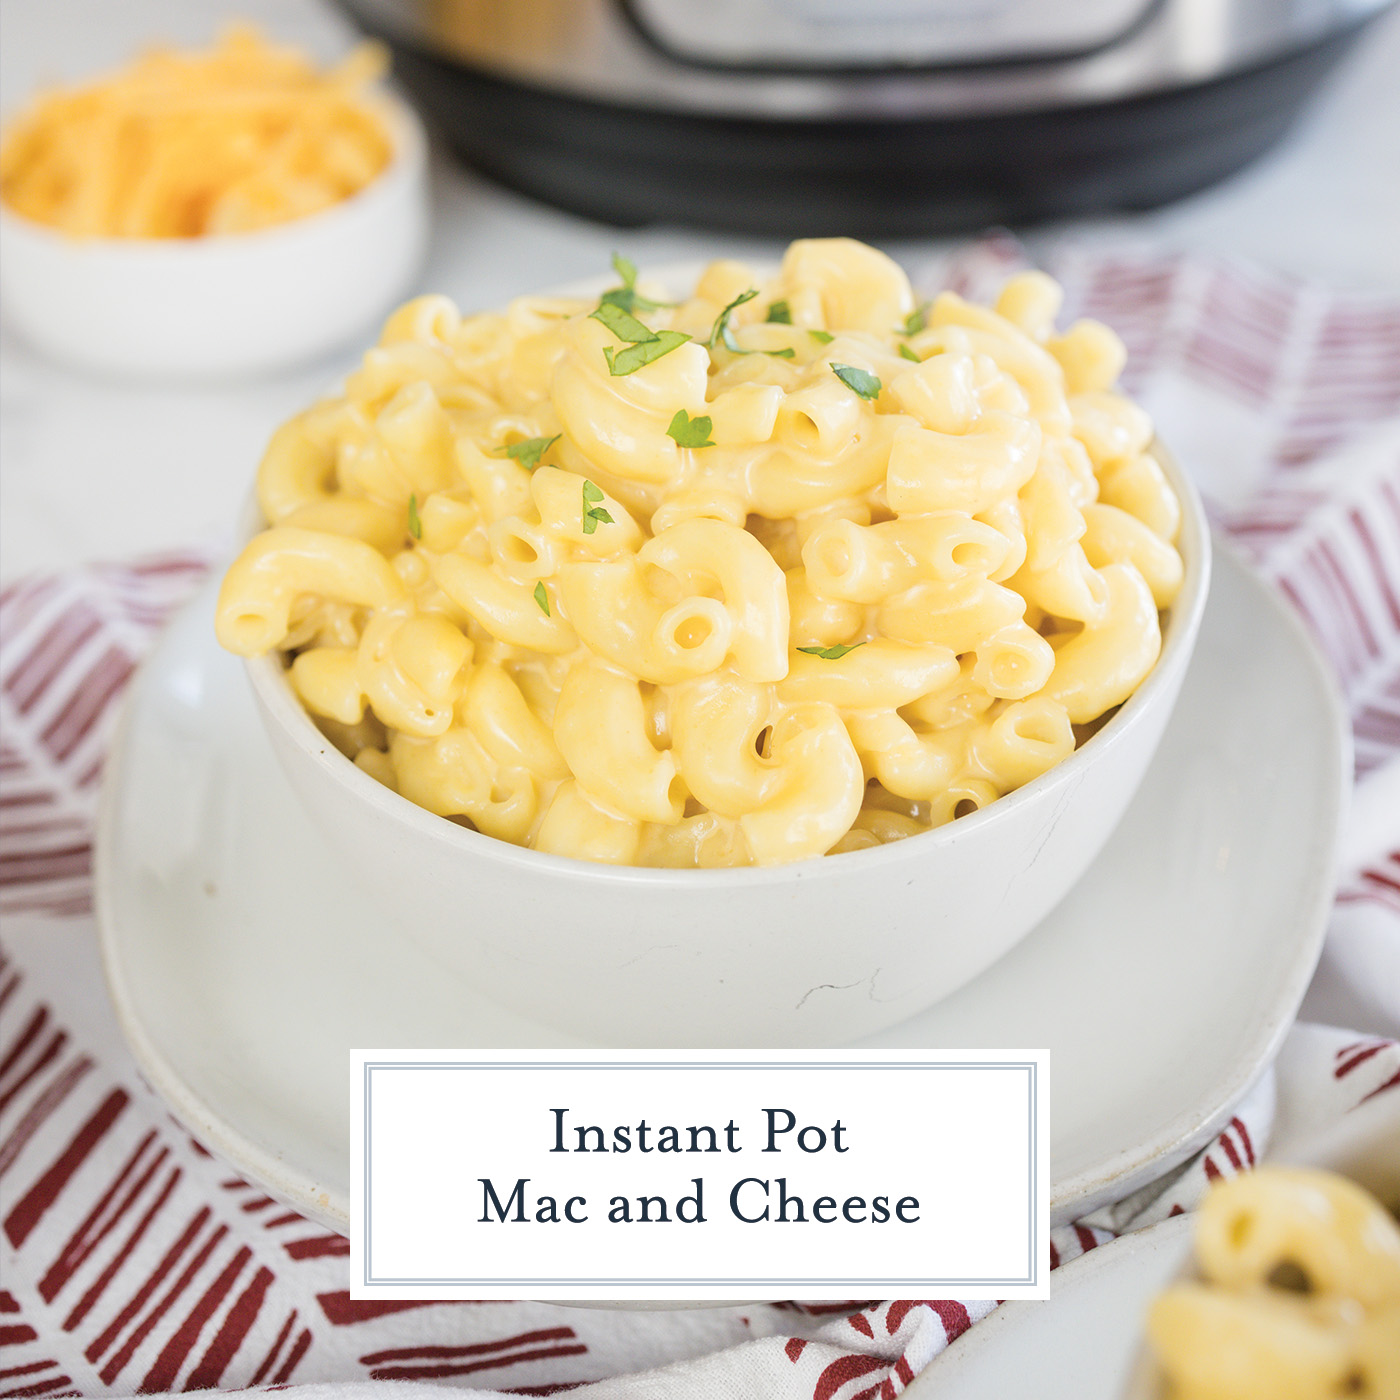 Instant Pot Mac and Cheese - Pressure Cooker Mac and Cheese